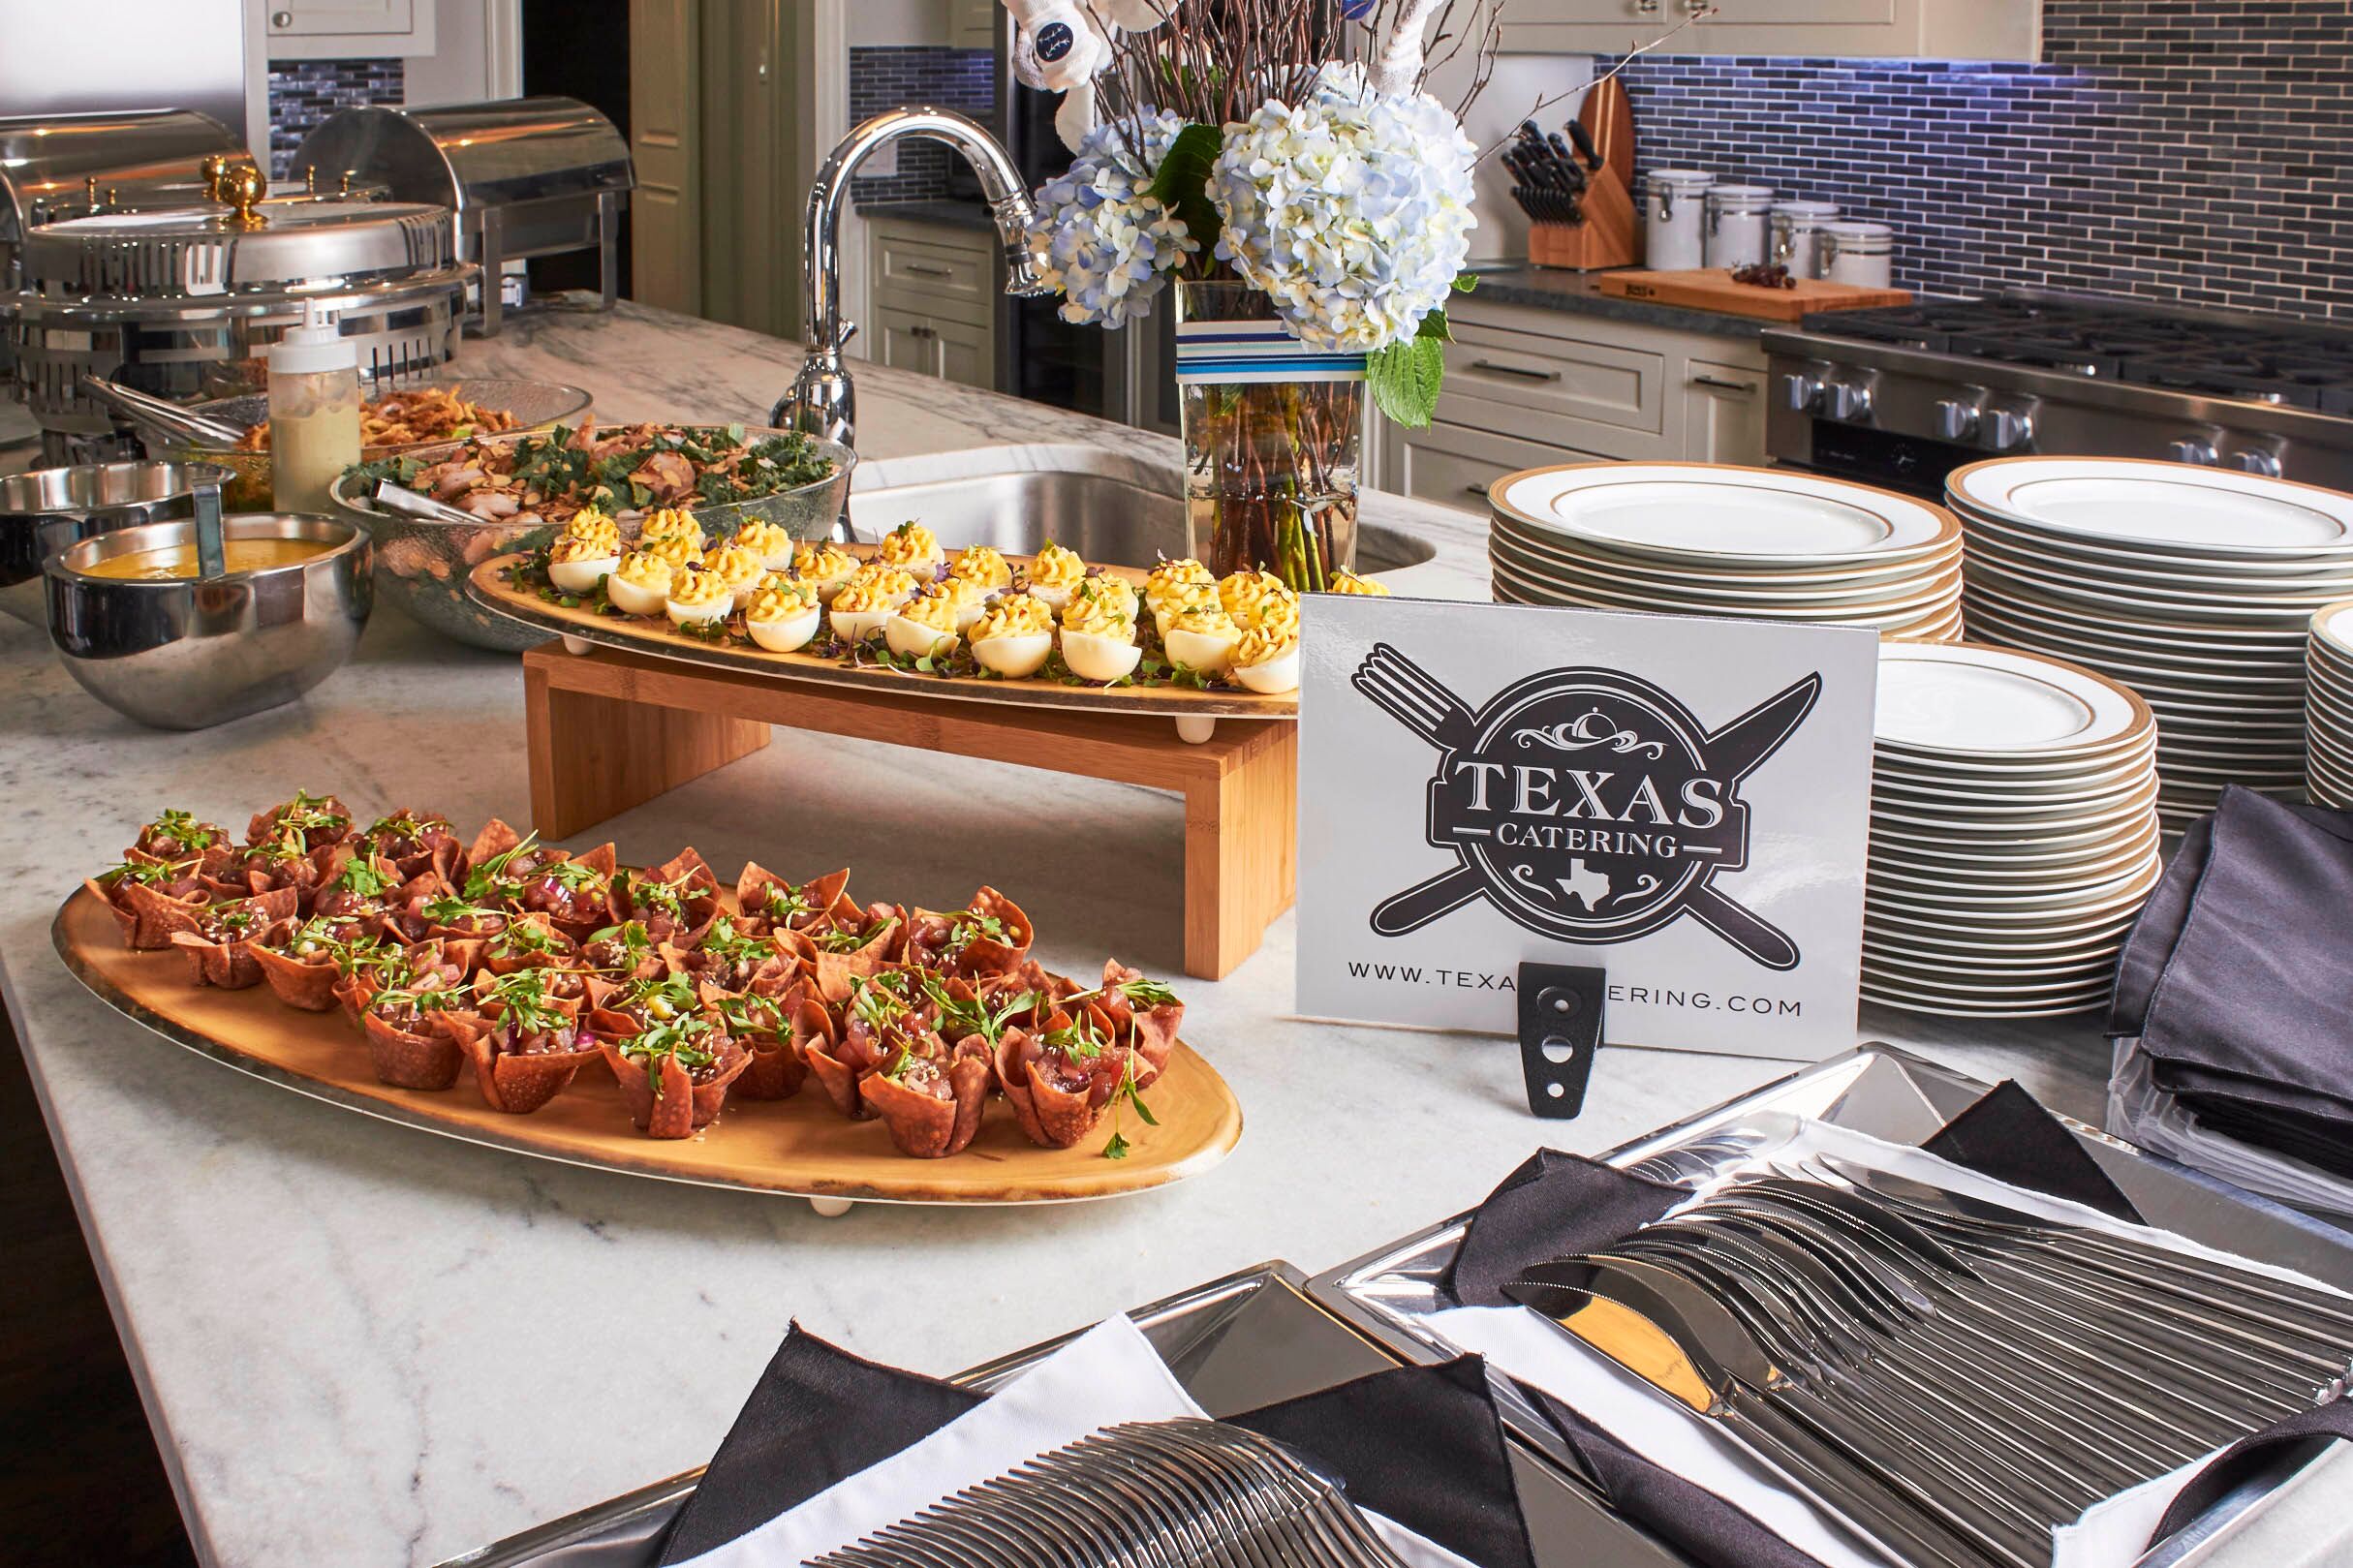 Texas Catering | Caterers - The Knot